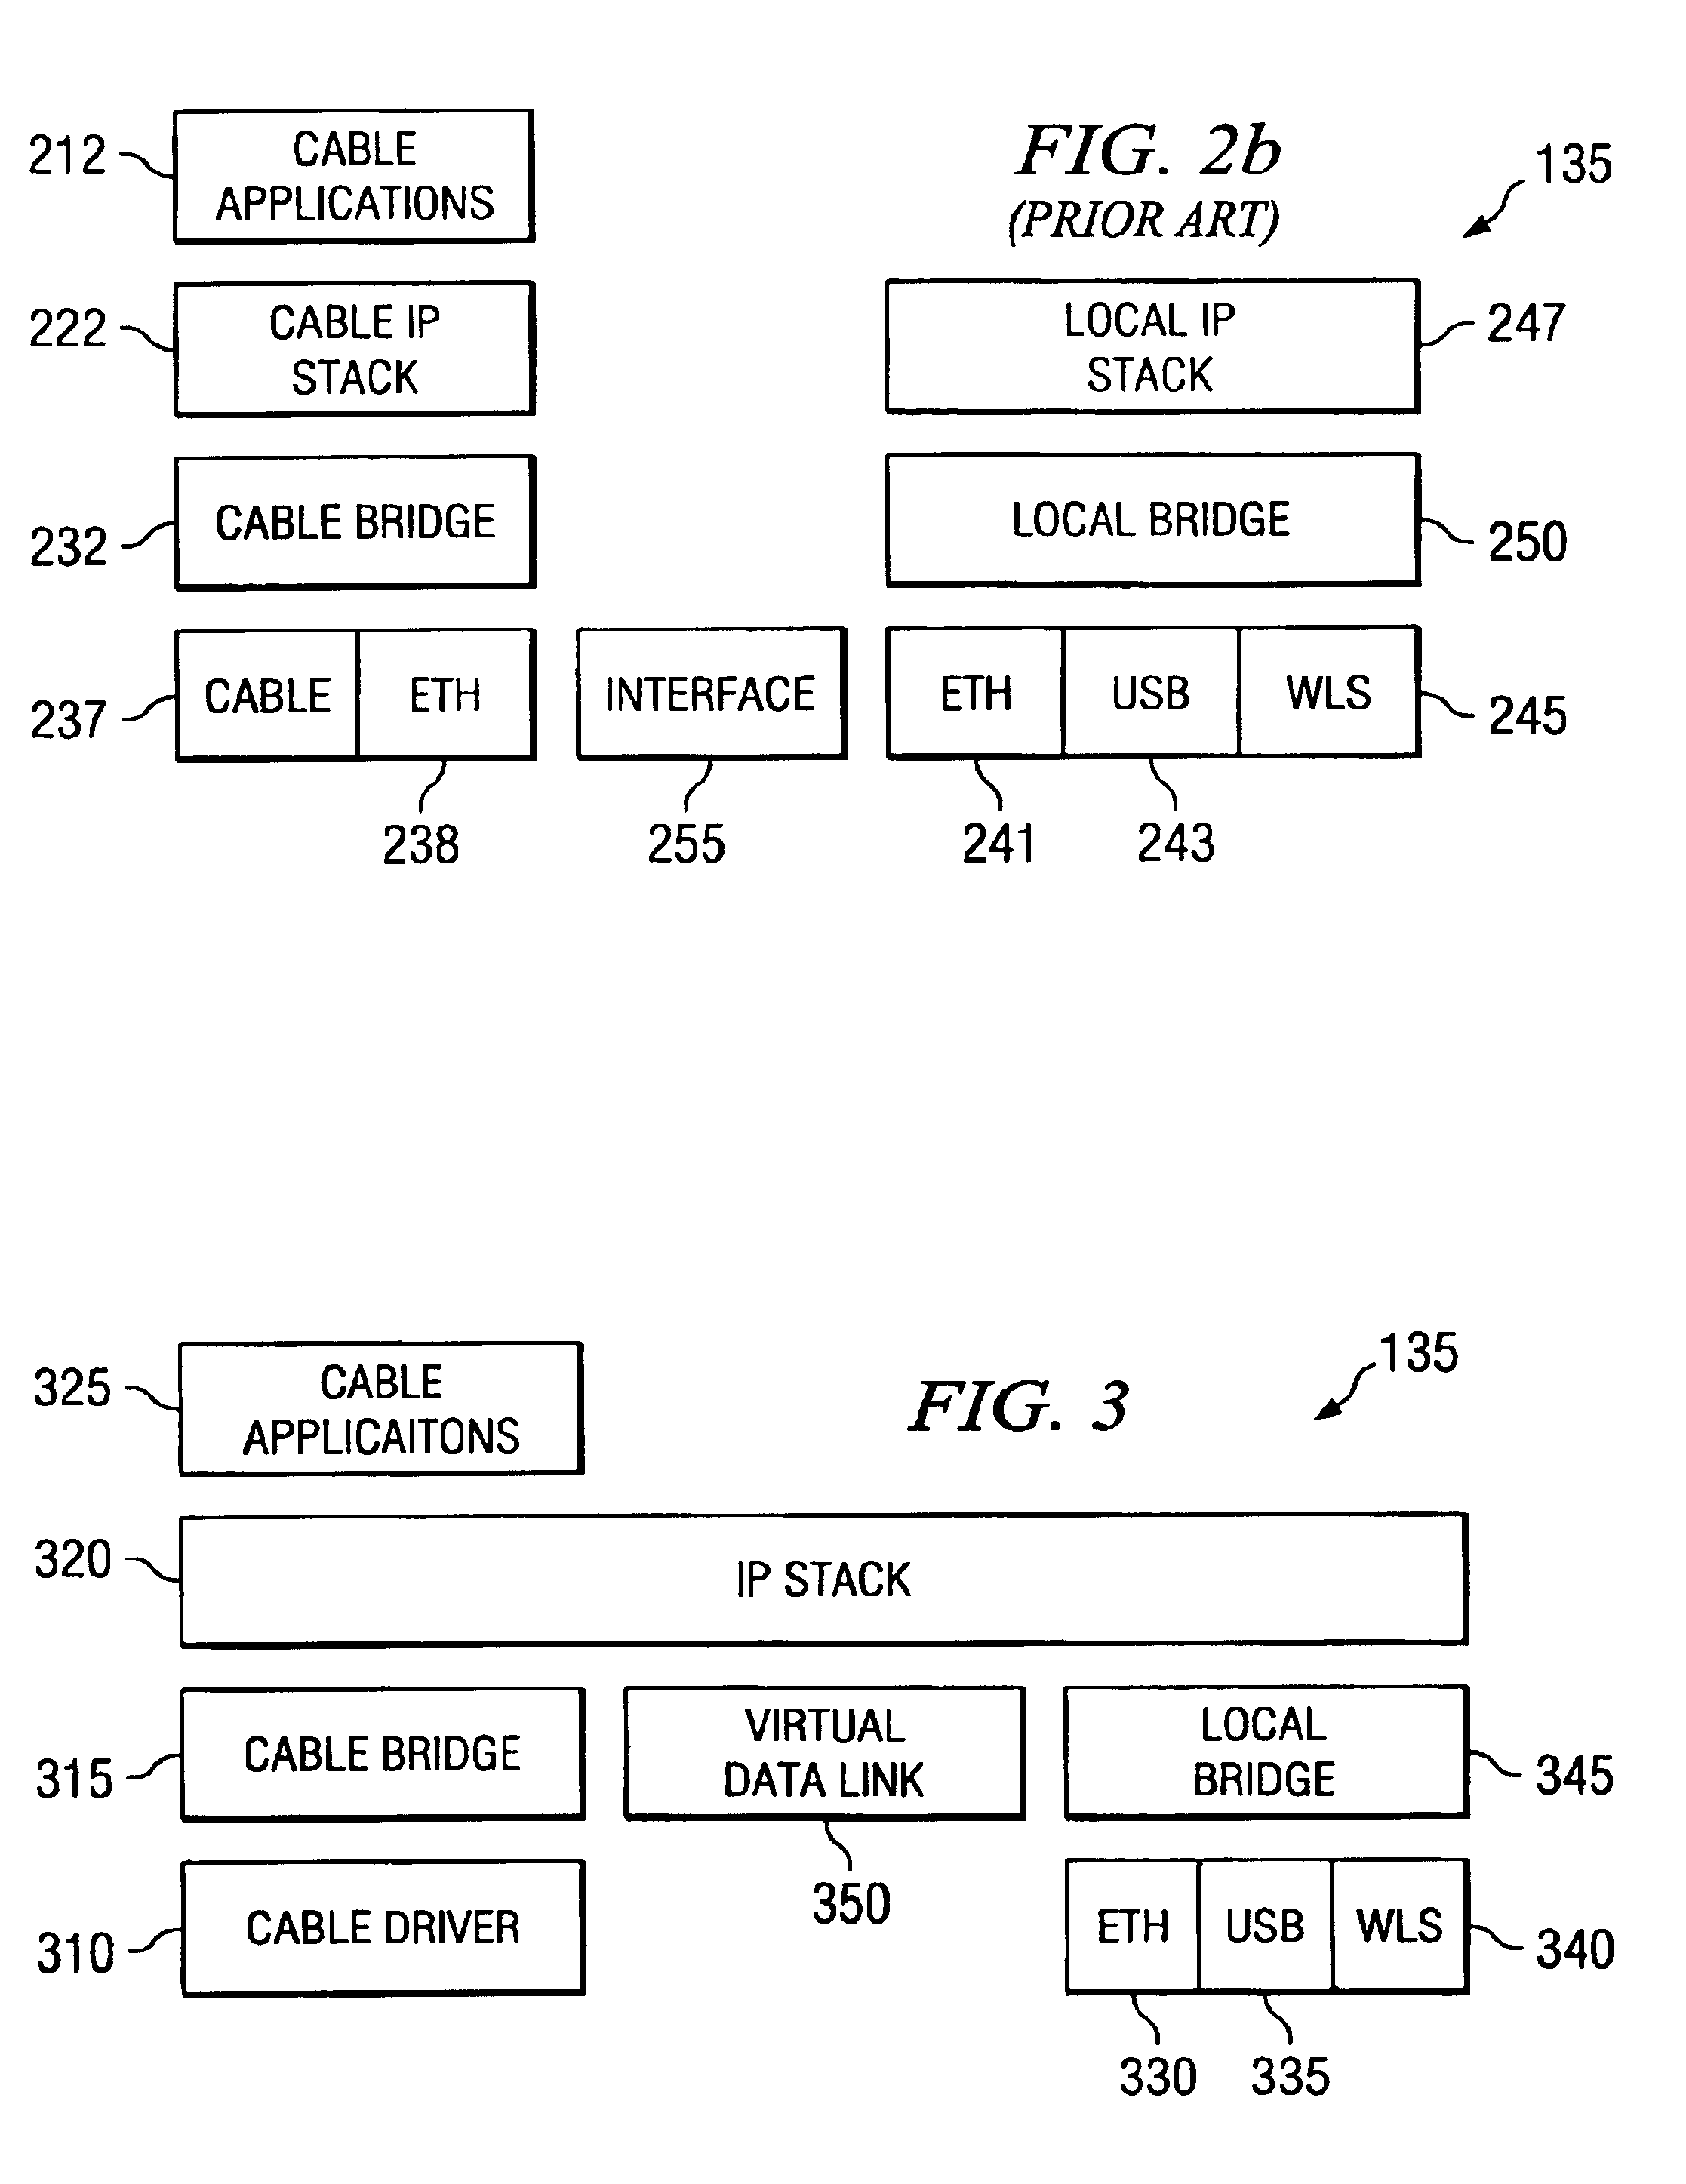 System and method for efficiently processing broadband network traffic